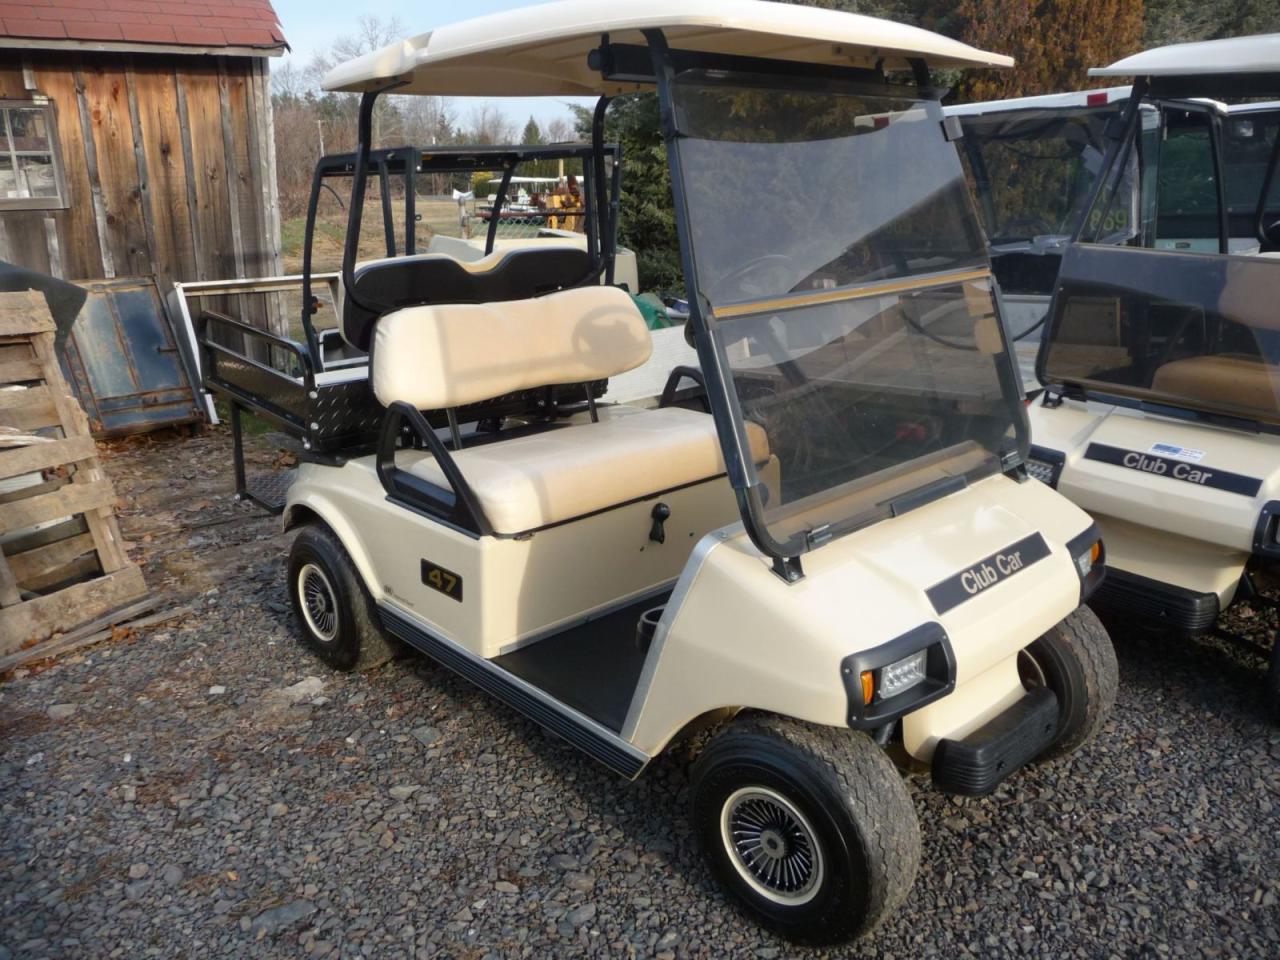 Find Your Perfect Ride: Used Golf Carts for Sale by Owner in Gregory, South Dakota